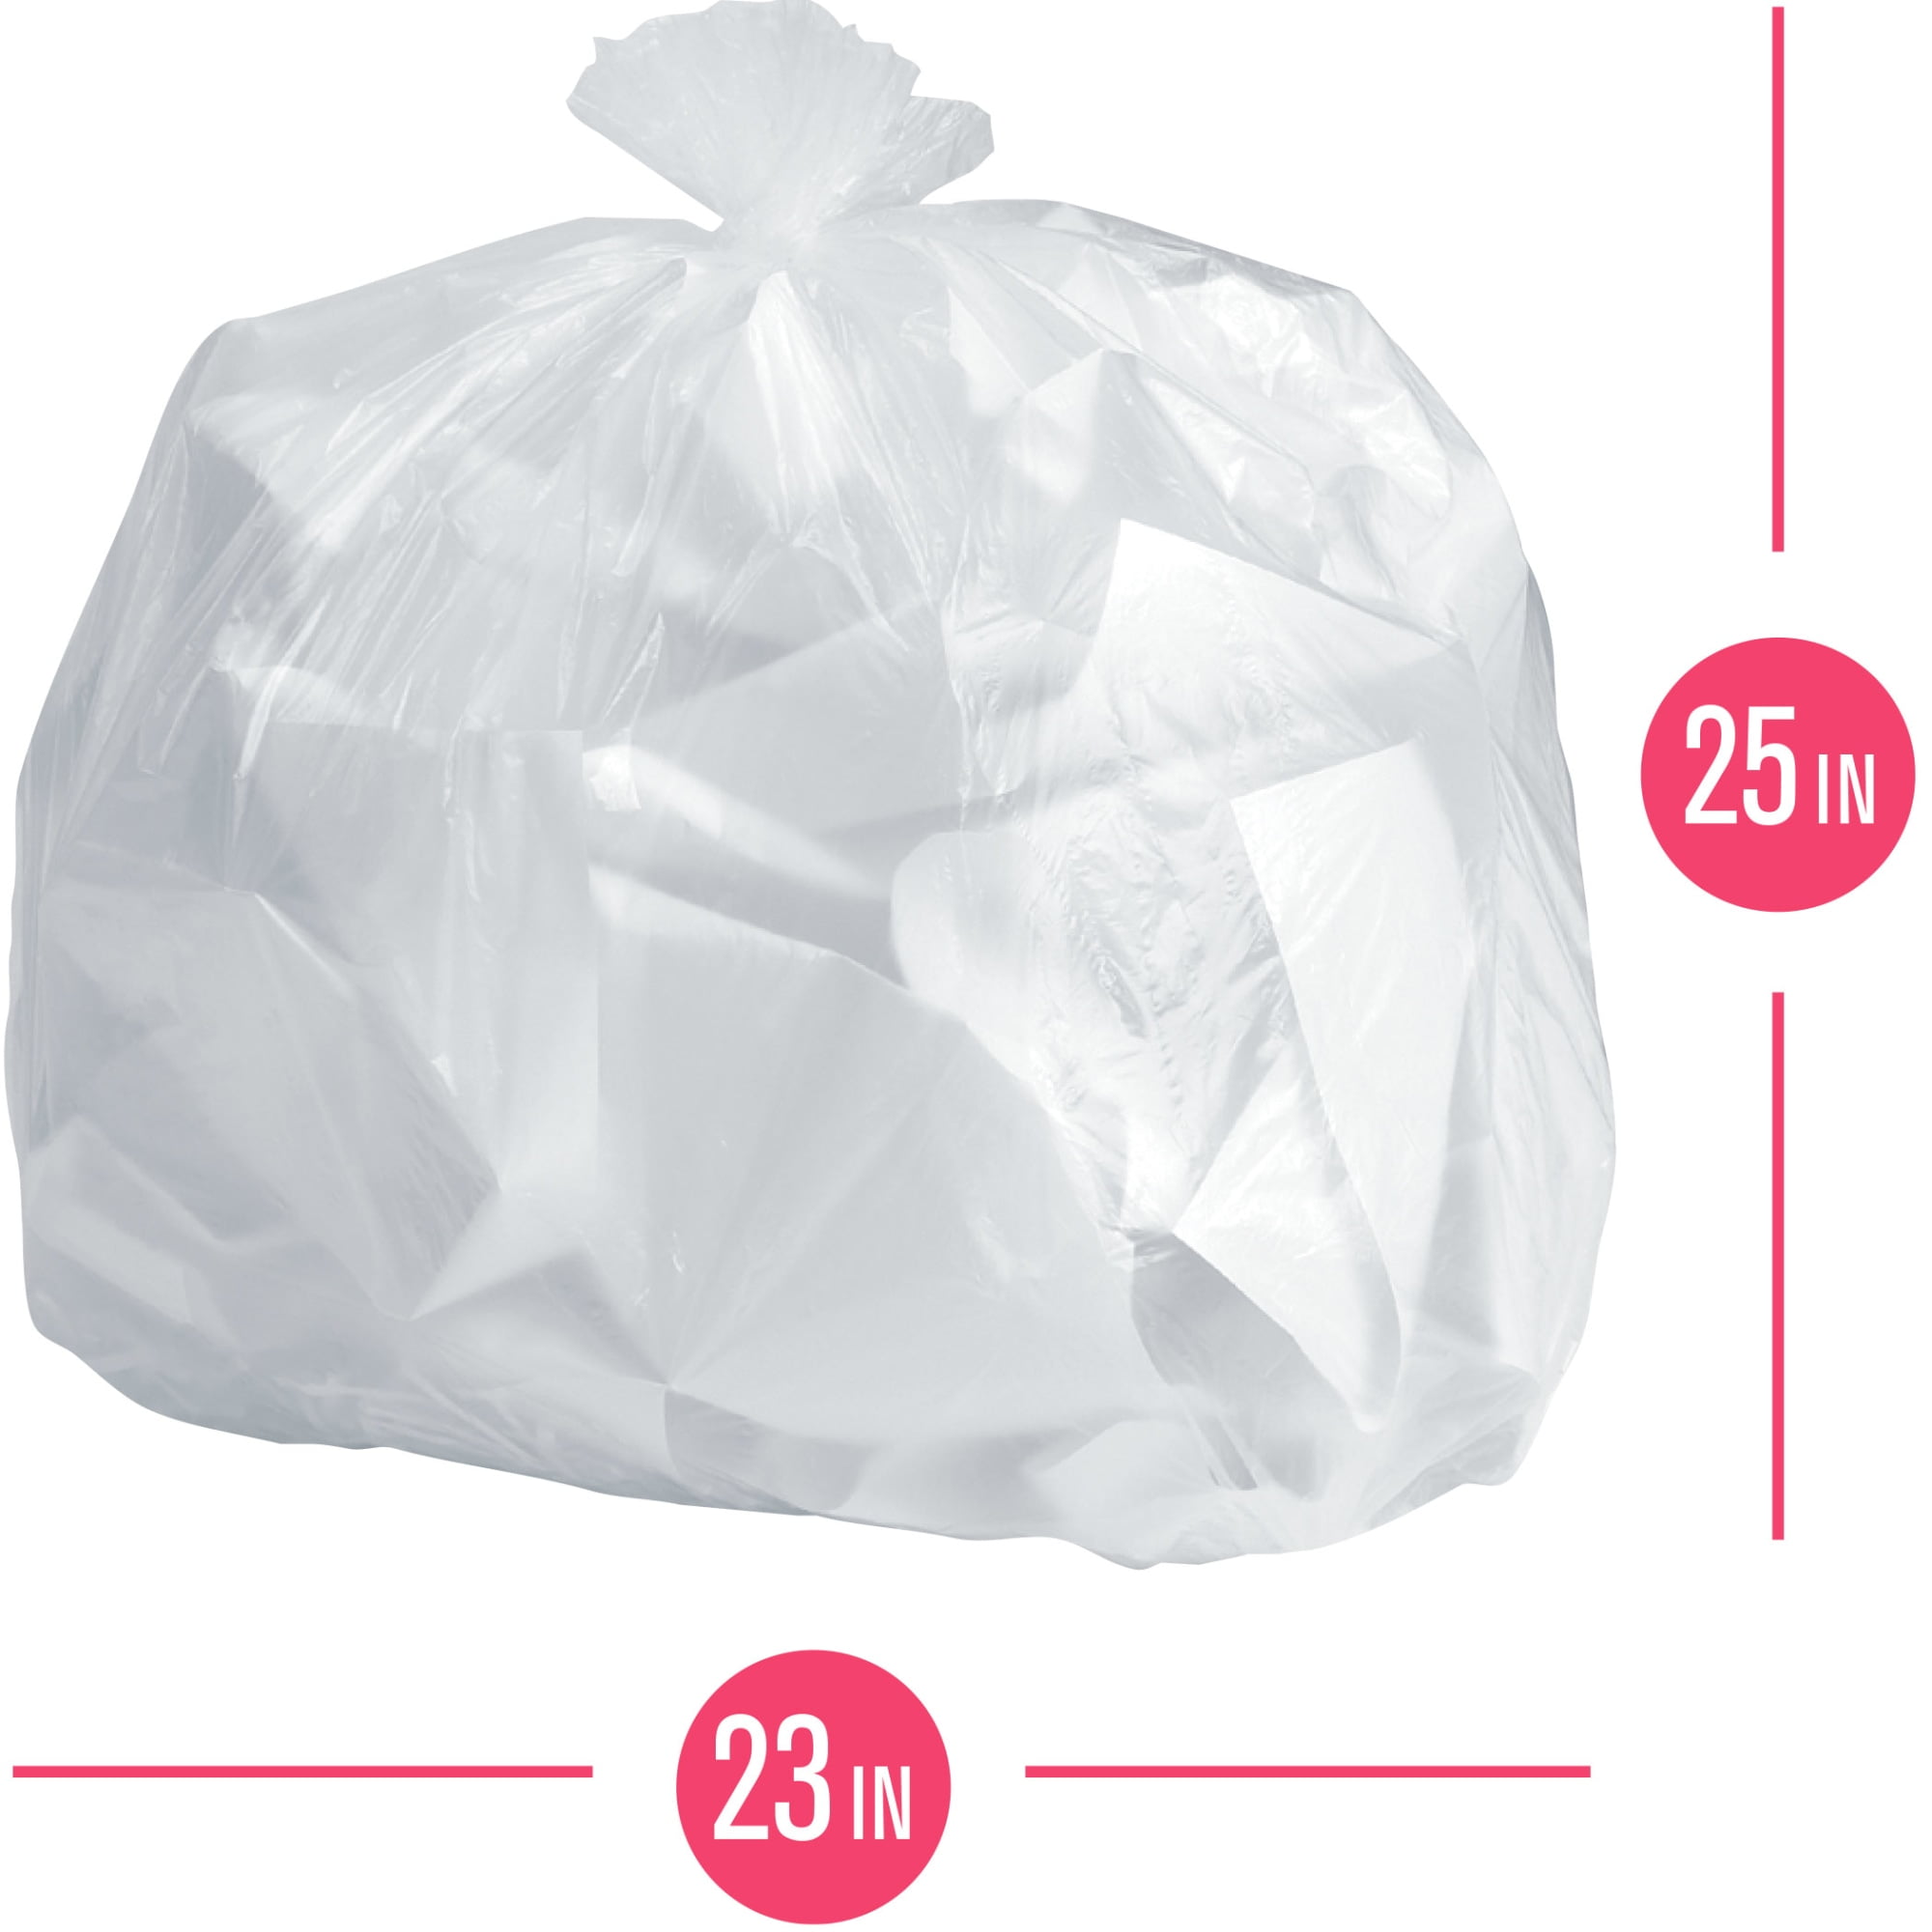 10 Gallon Clear Trash Bags - The Box Station